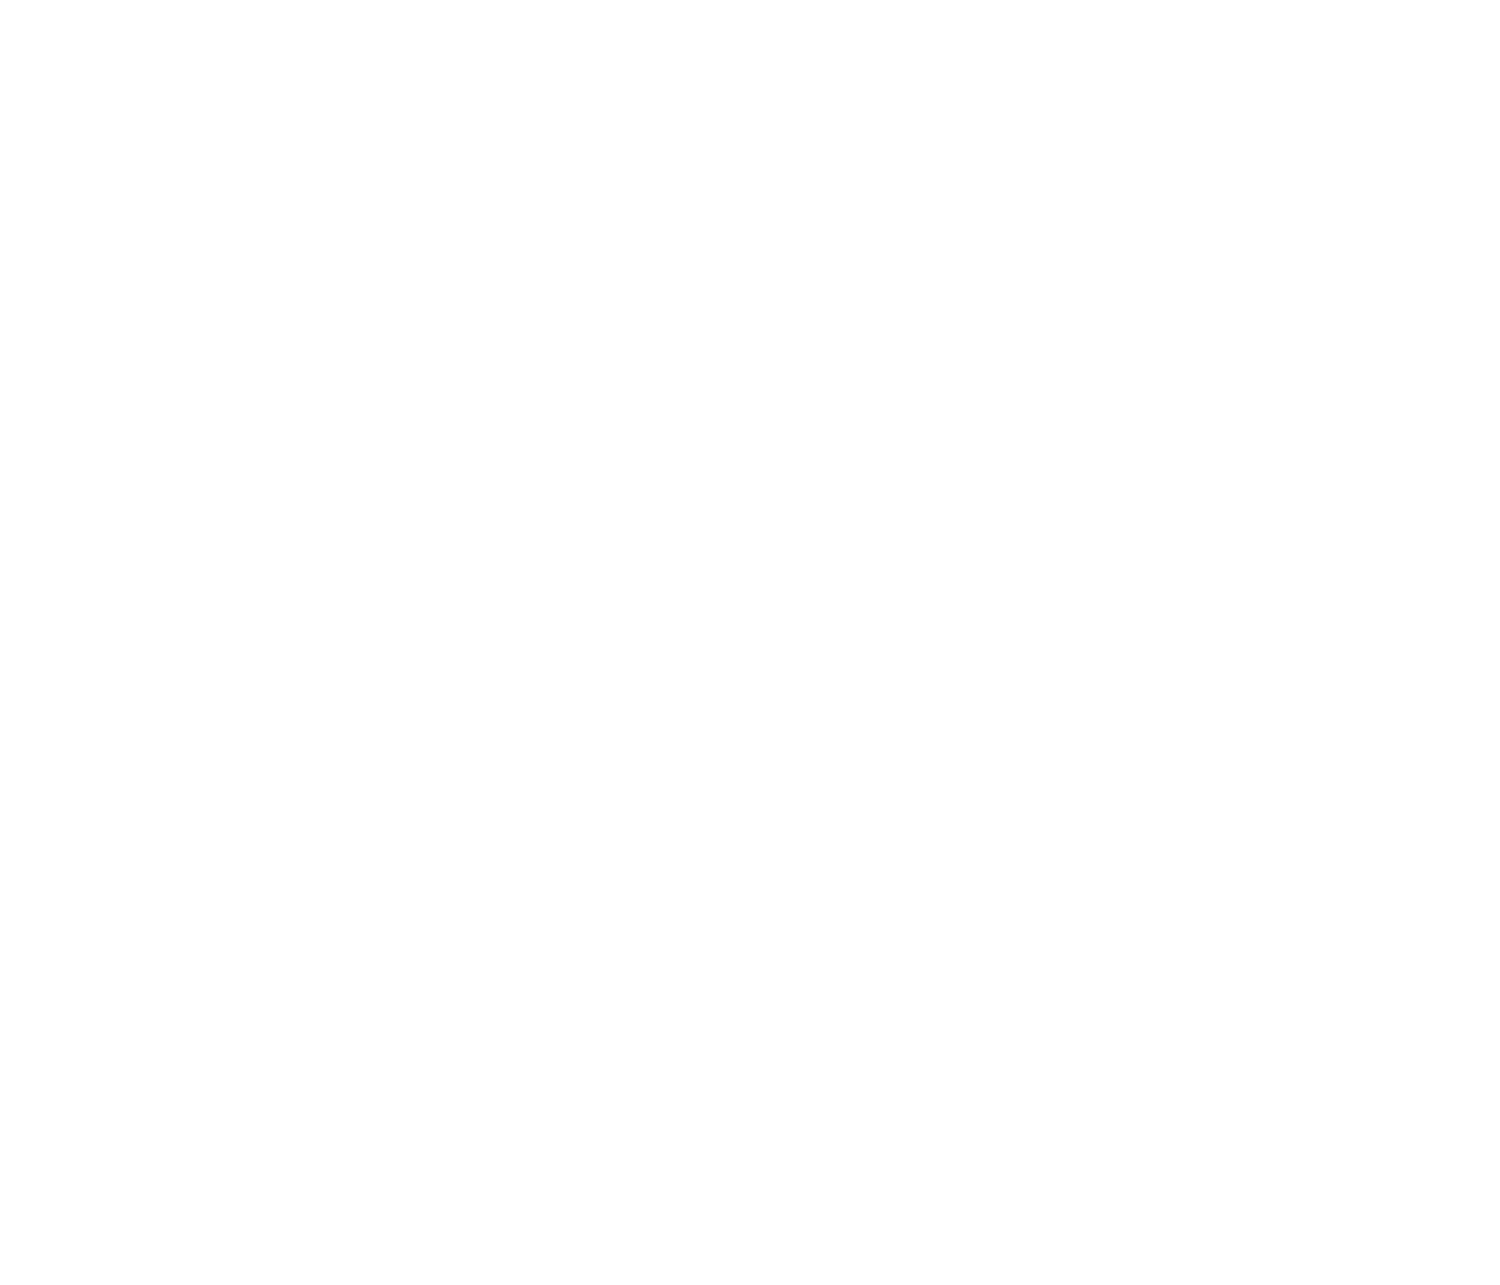 National Psychosocial Safety Network